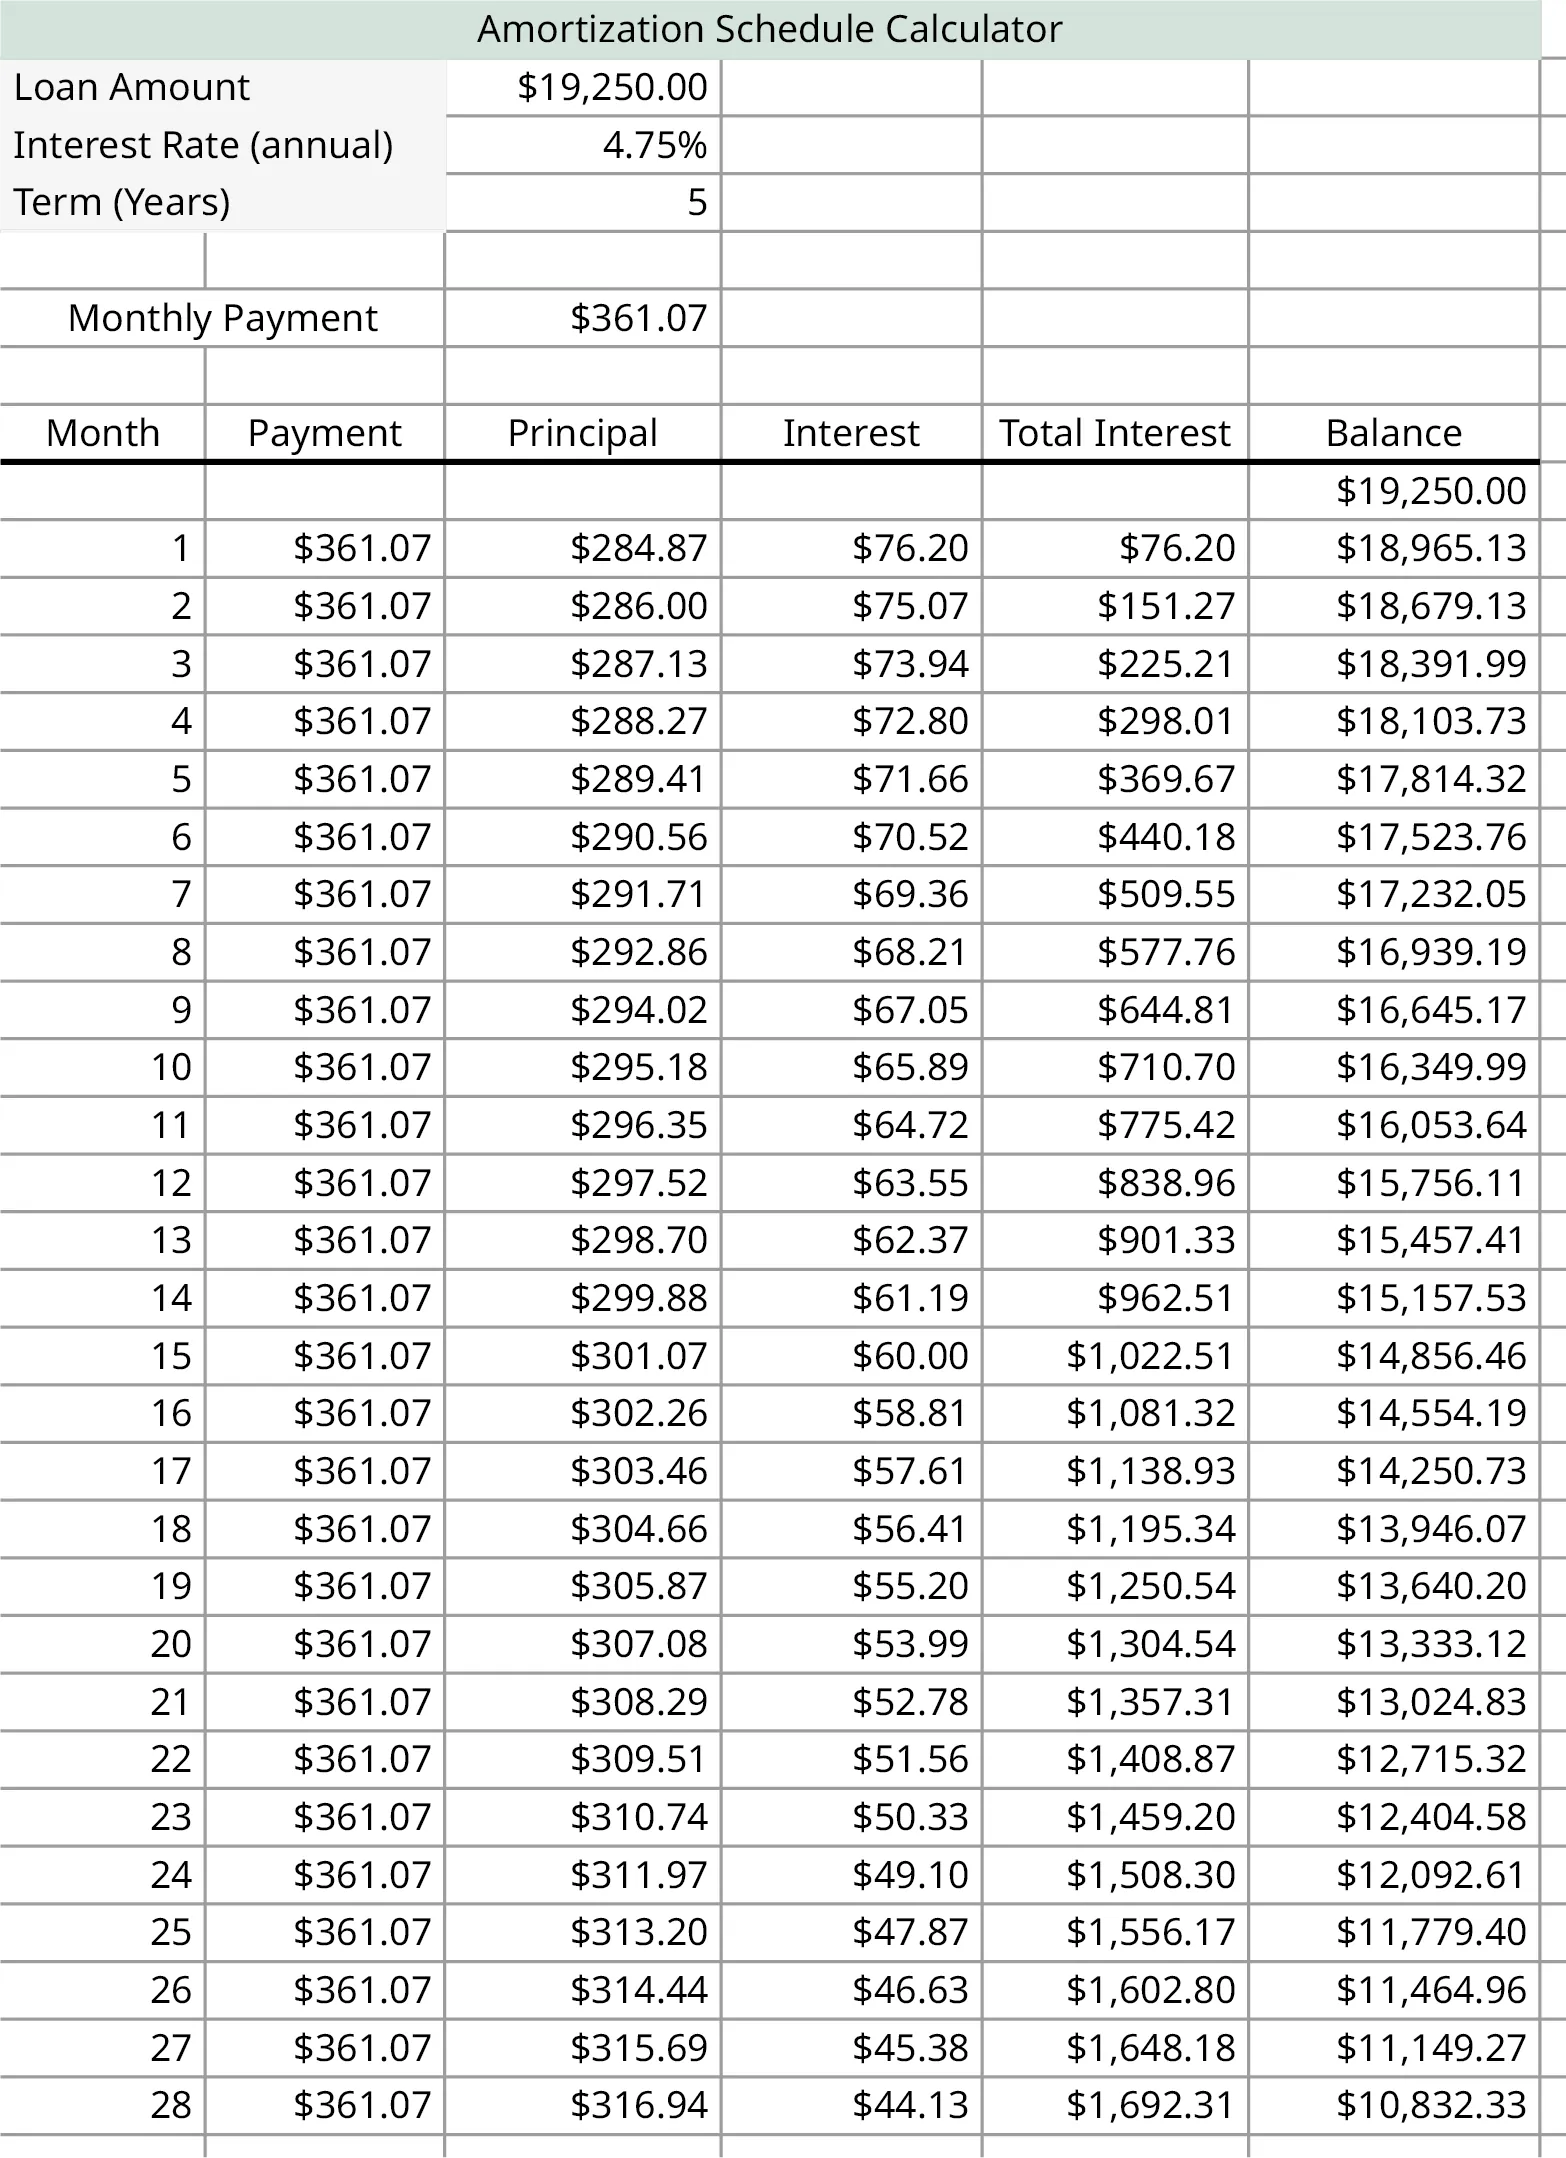 A spreadsheet labeled as amortization schedule calculator. The sheet calculates the repayment for the loan amount of $19,250.00 for an interest rate of 4.75 percent annually and the monthly payment is $361.07 over 10 years. The factors include calculations such as month, payment, principal, interest, total, and interest and balance.